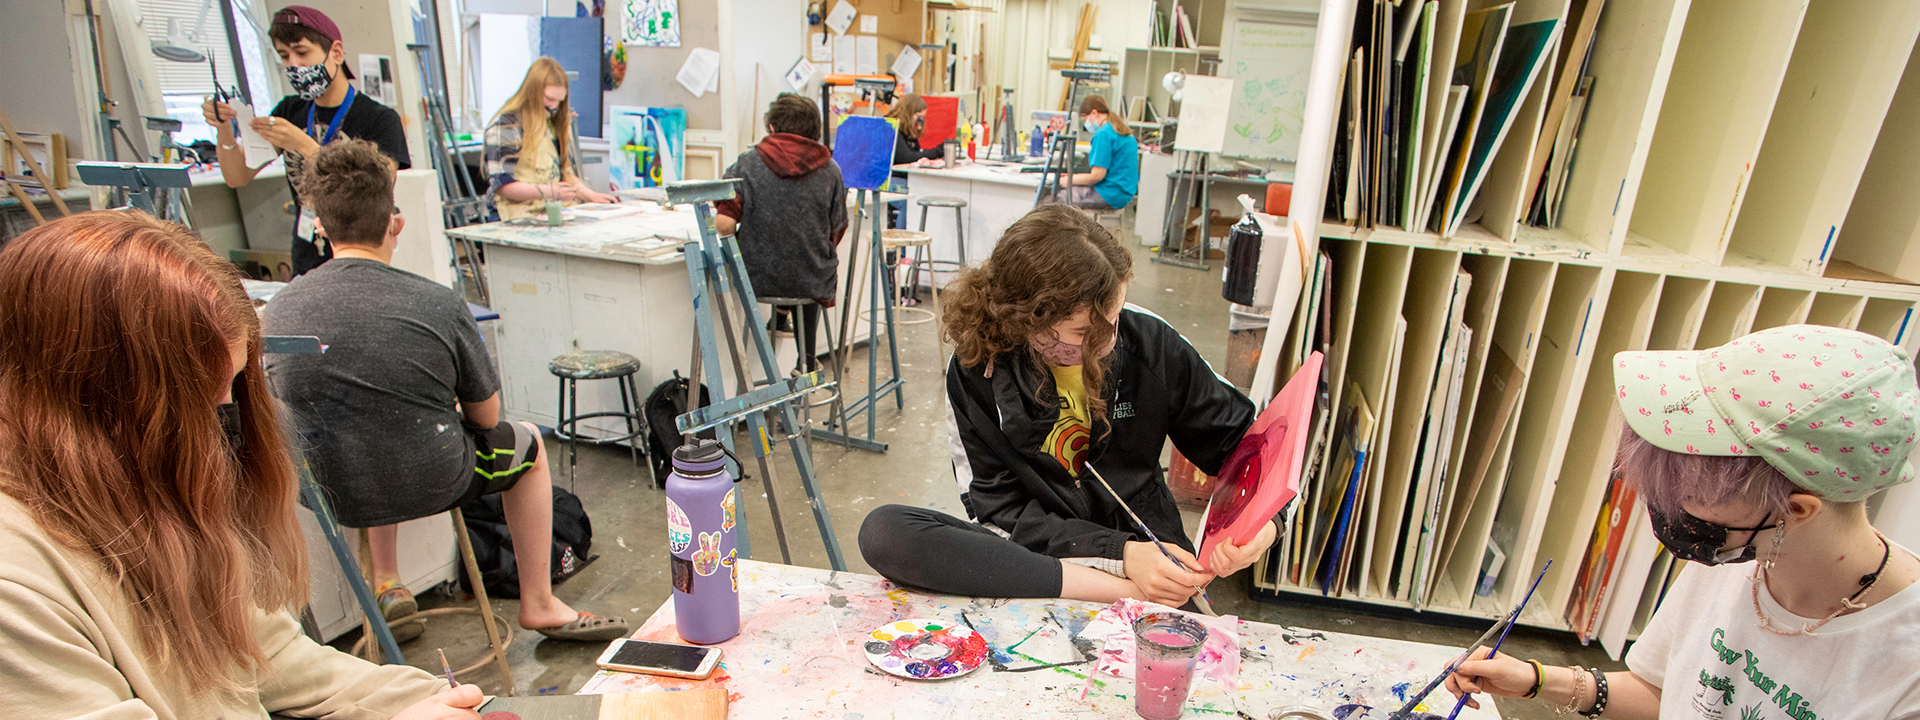 (from left) Oakley Mccullough, Elise Theis and Jo Tapp work on their creations in Painting class during the 2022 Summer Visual Arts Academy at the UAF Art Department in the Fine Arts Complex on the UAF campus Tuesday, June 14, 2022. UAF Photo by Eric Engman